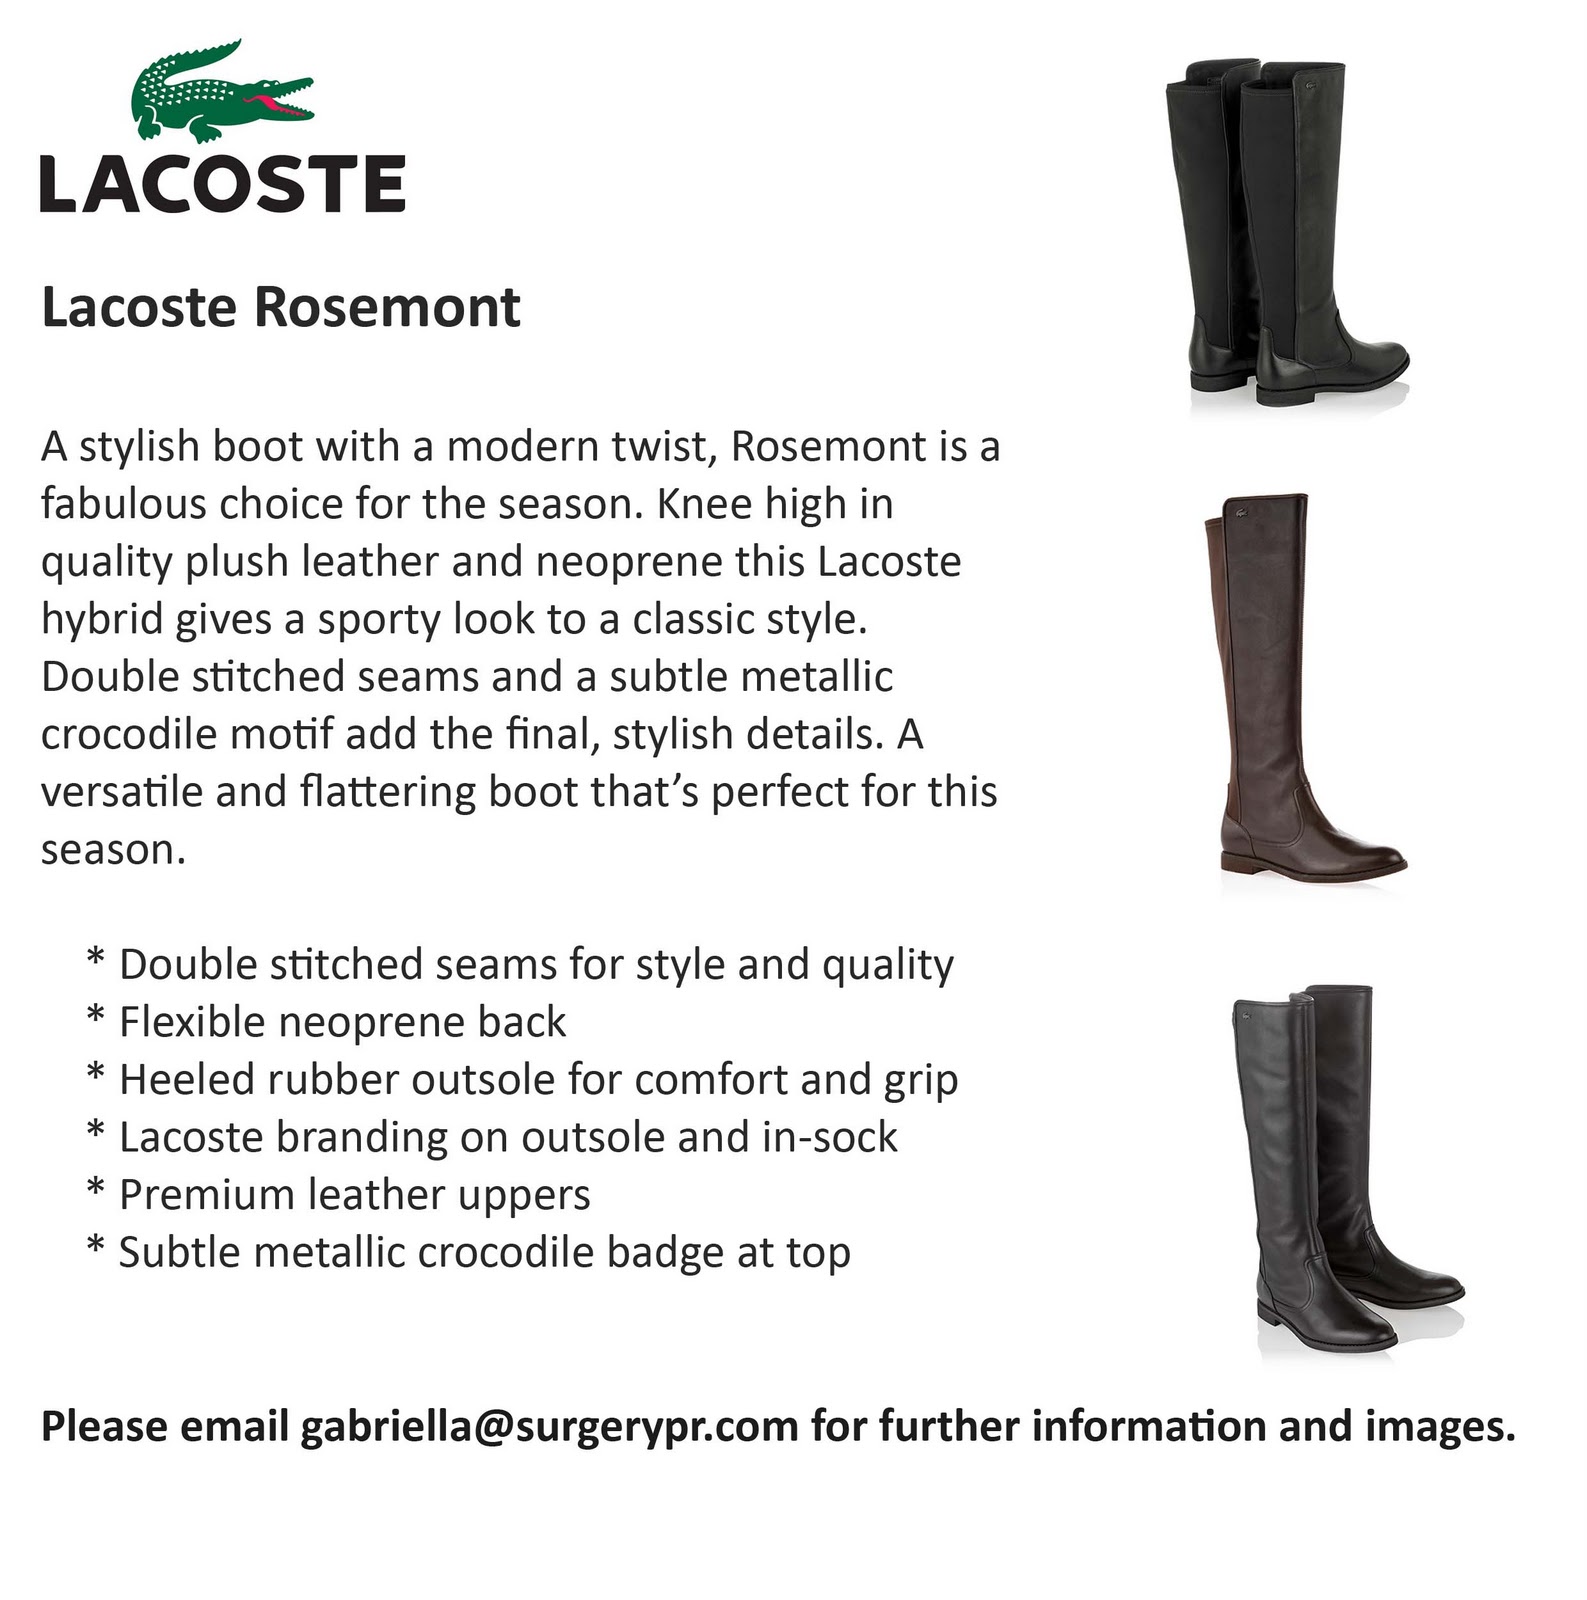 Who knew…Knee High Boots by Lacoste?